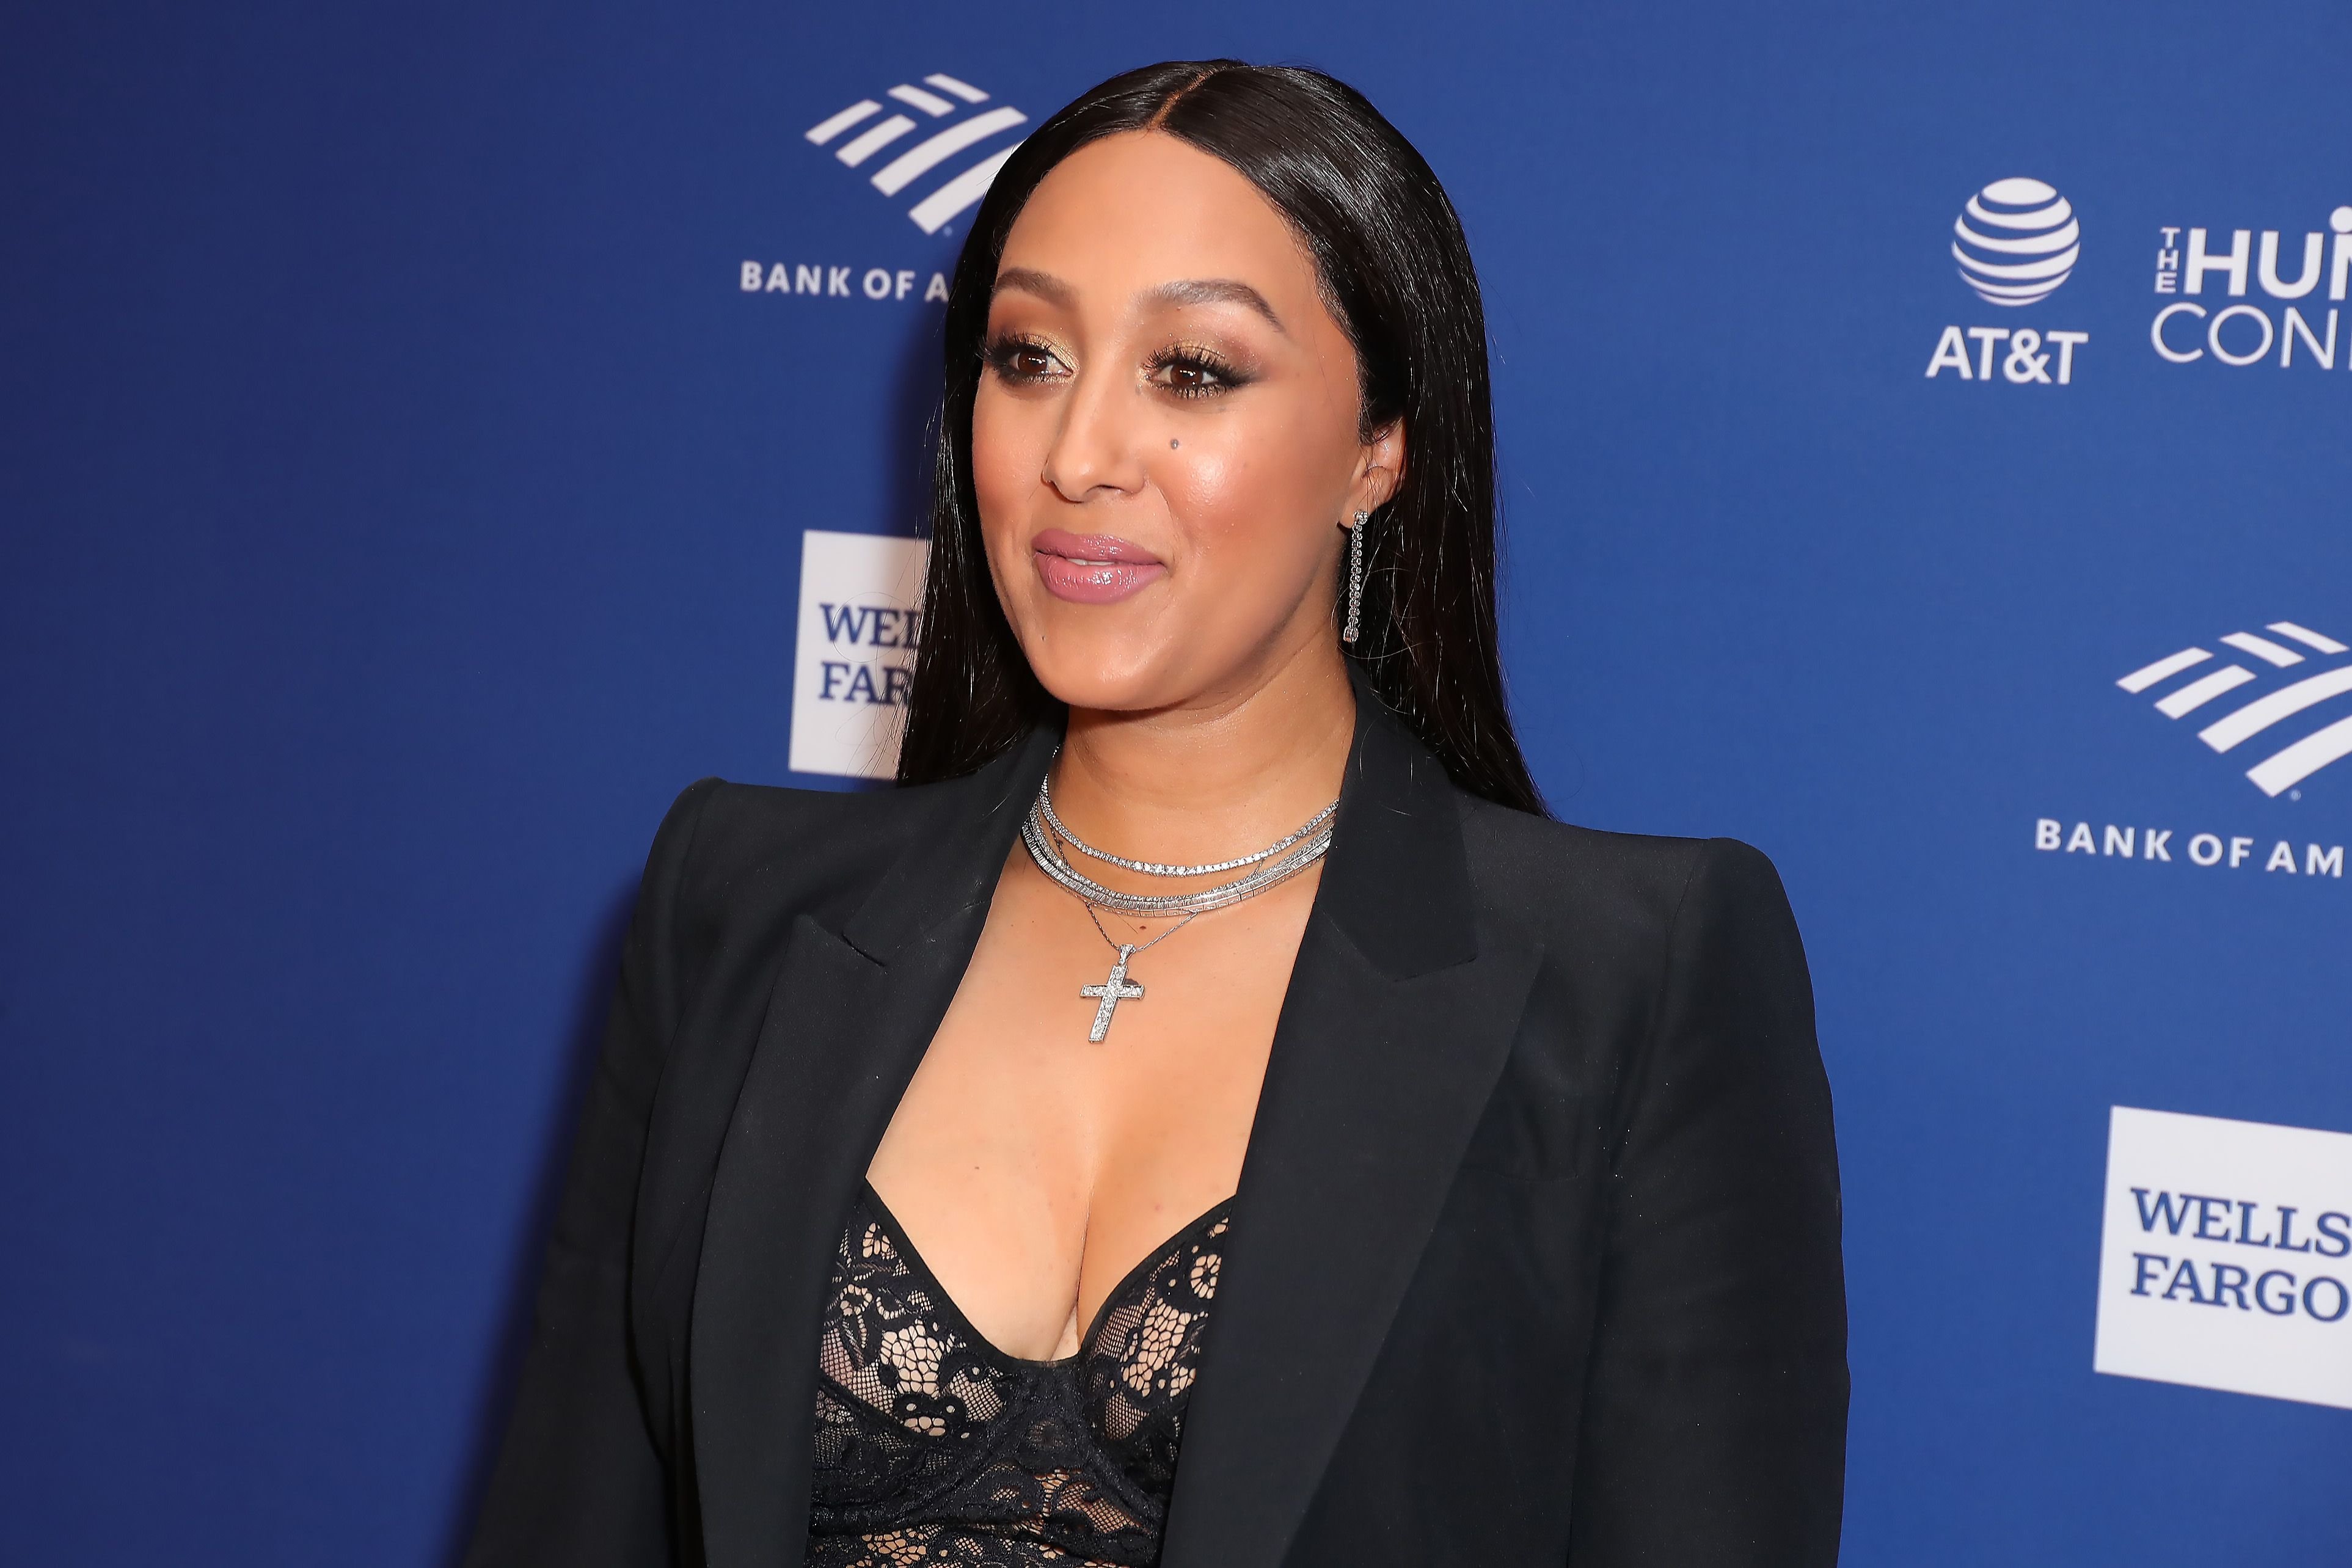 Tamera Mowry-Housley at the 51st NAACP Image Awards on February 21, 2020 | Photo: Getty Images